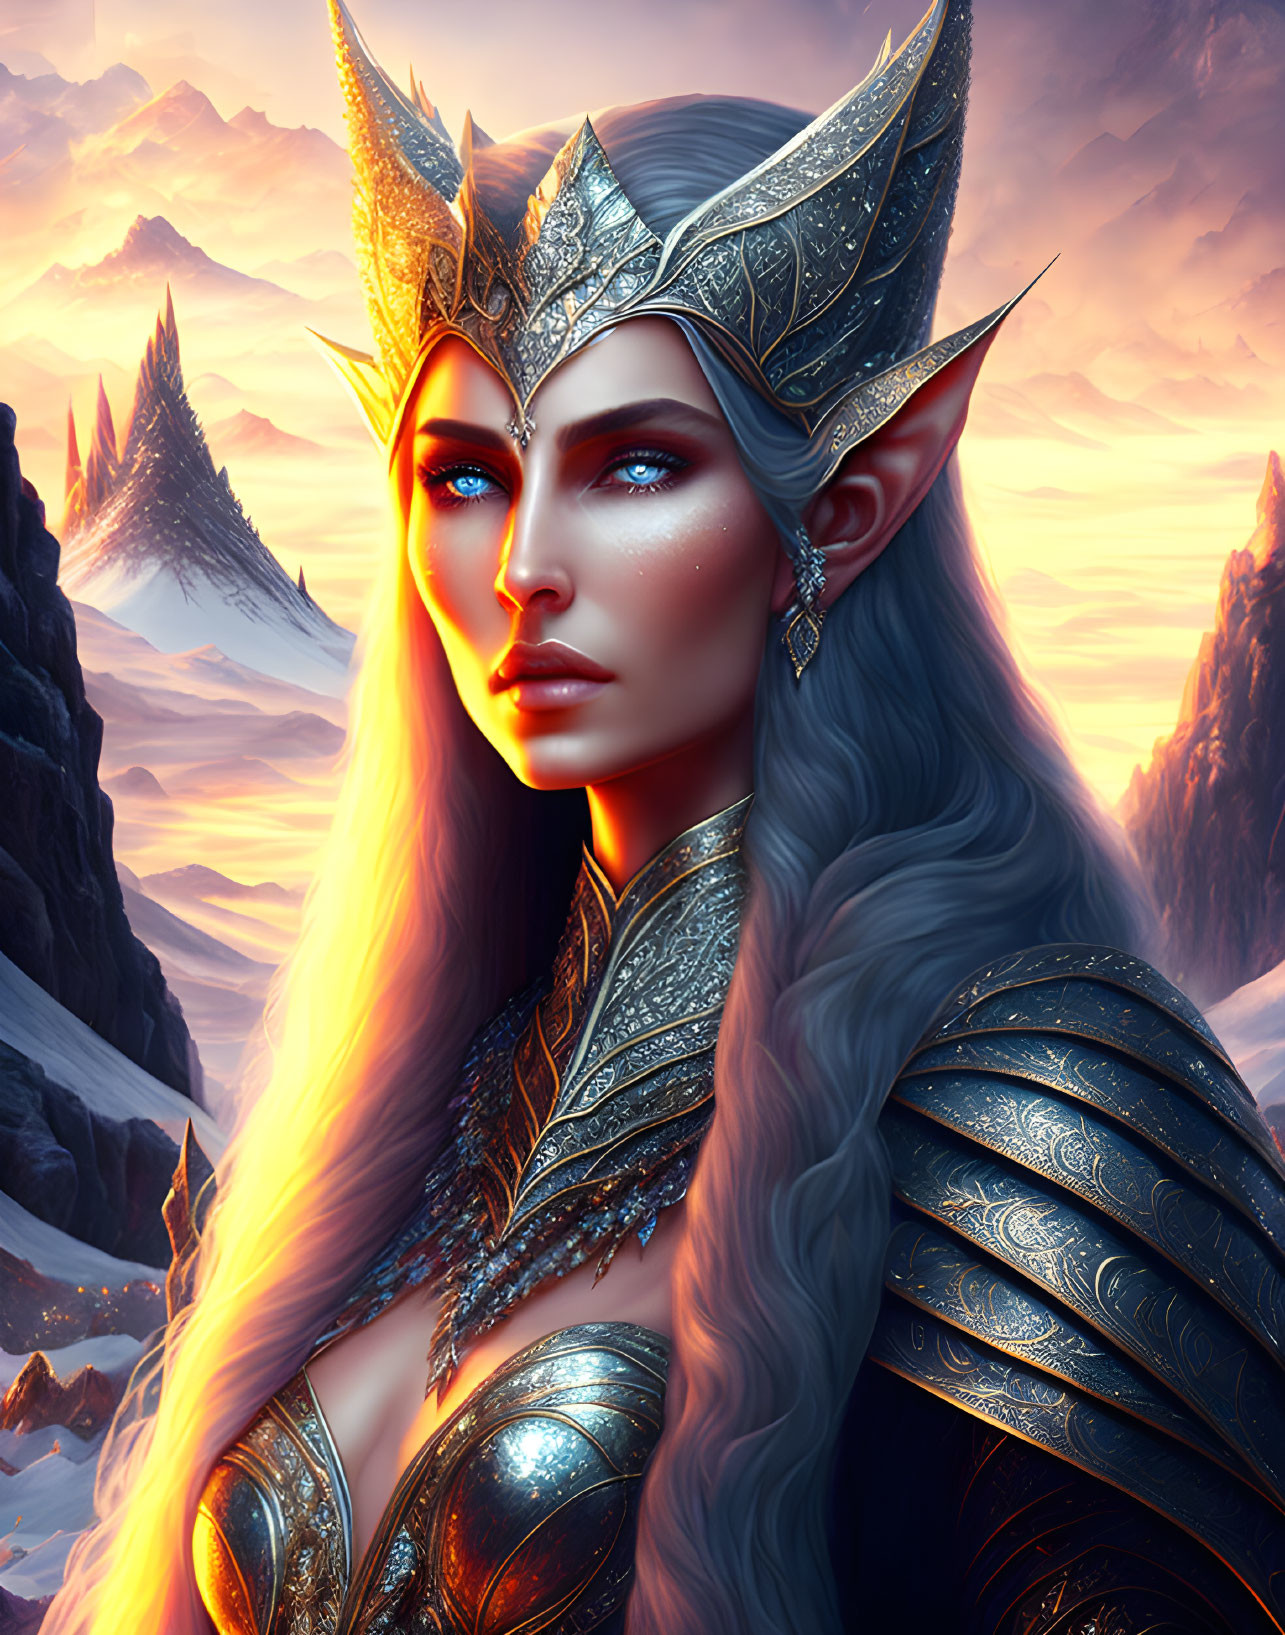 Female elf portrait with silver armor and crown in mountain sunset scene